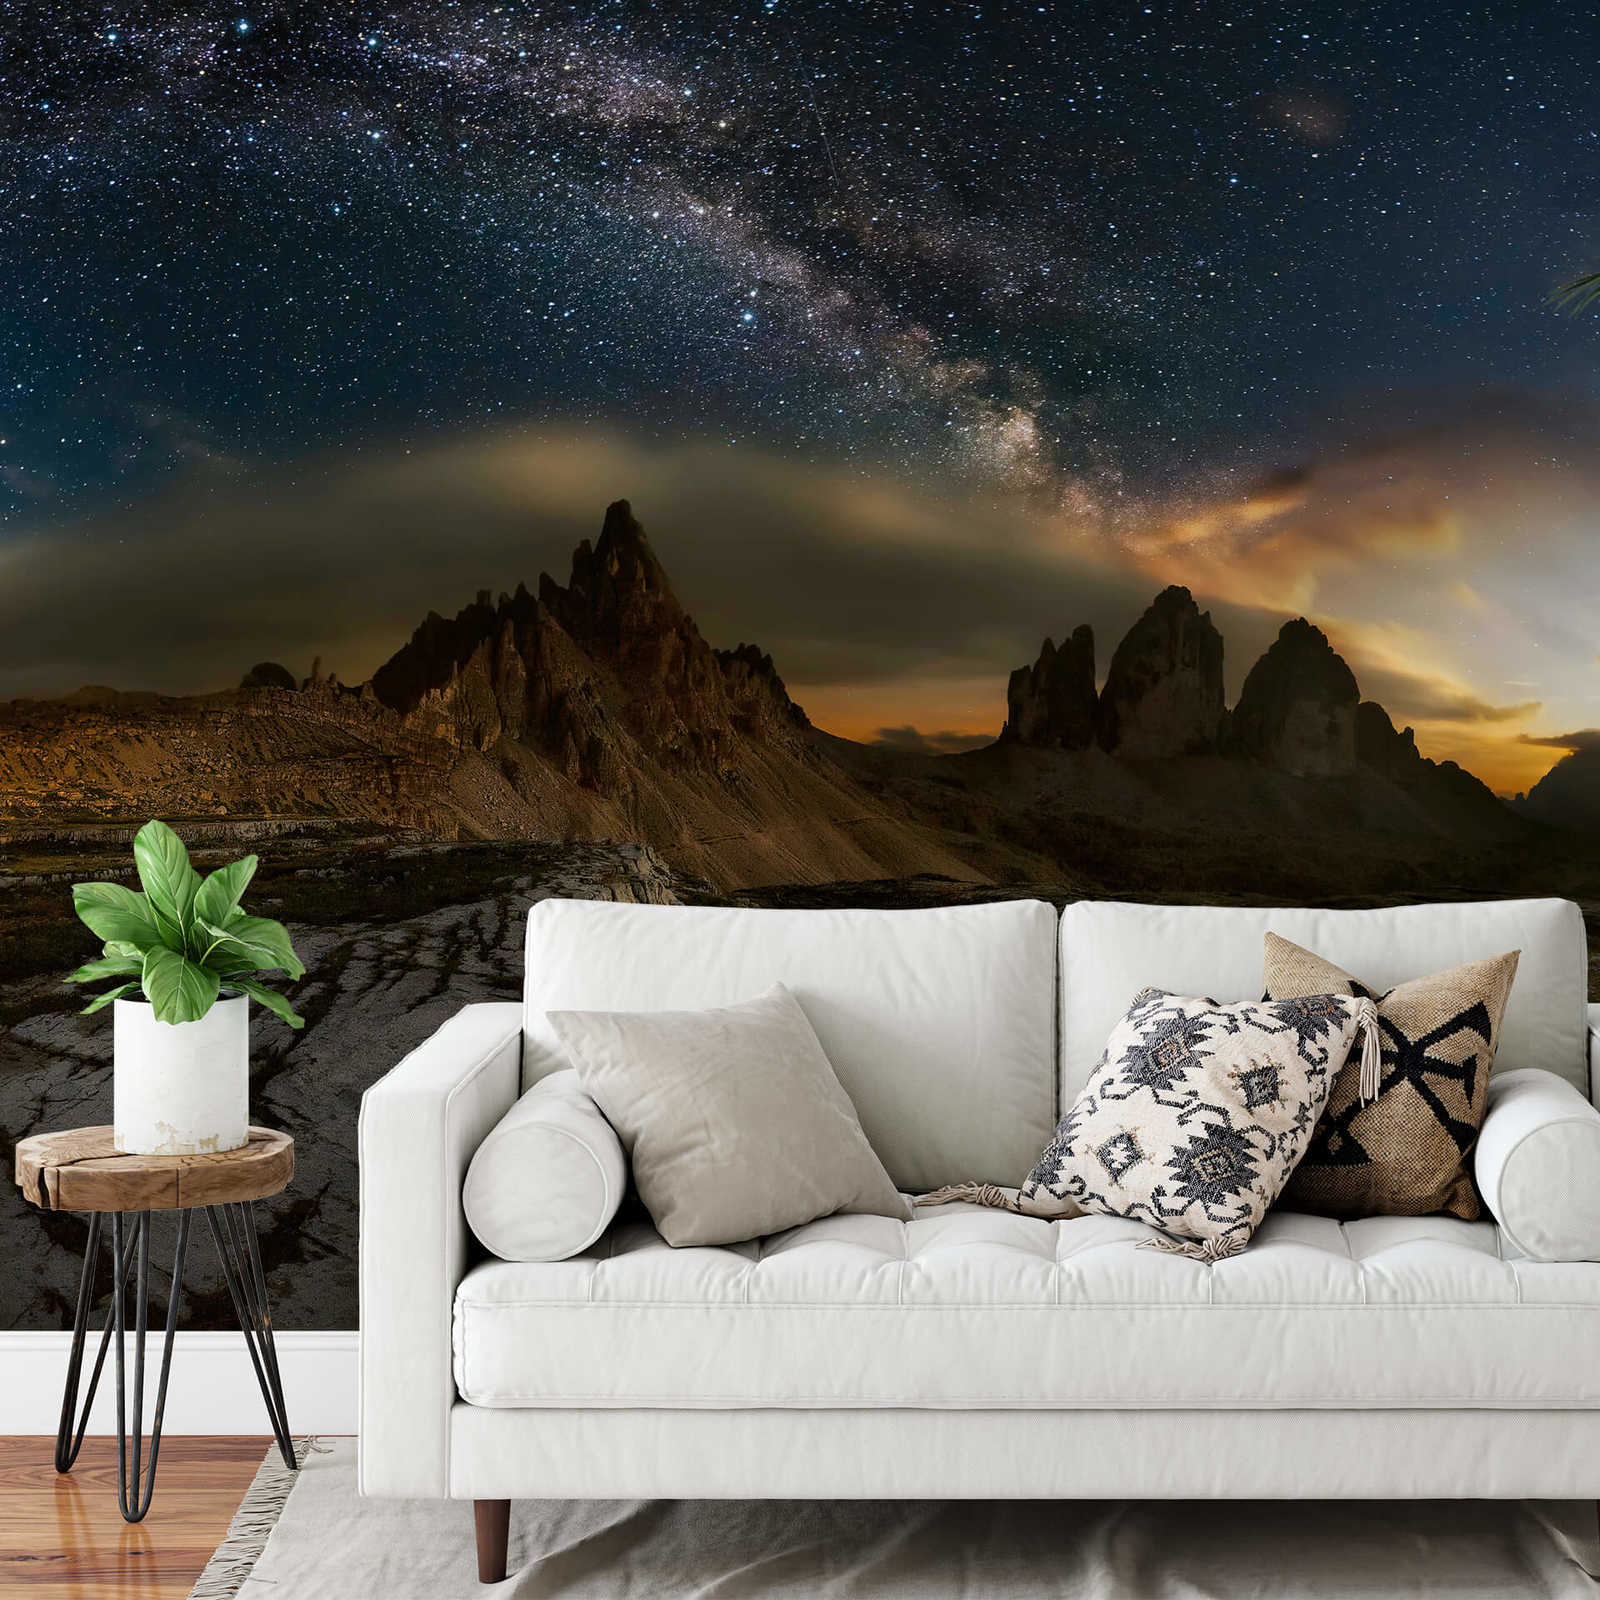             Photo wallpaper mountains with galaxy - blue, white, brown
        